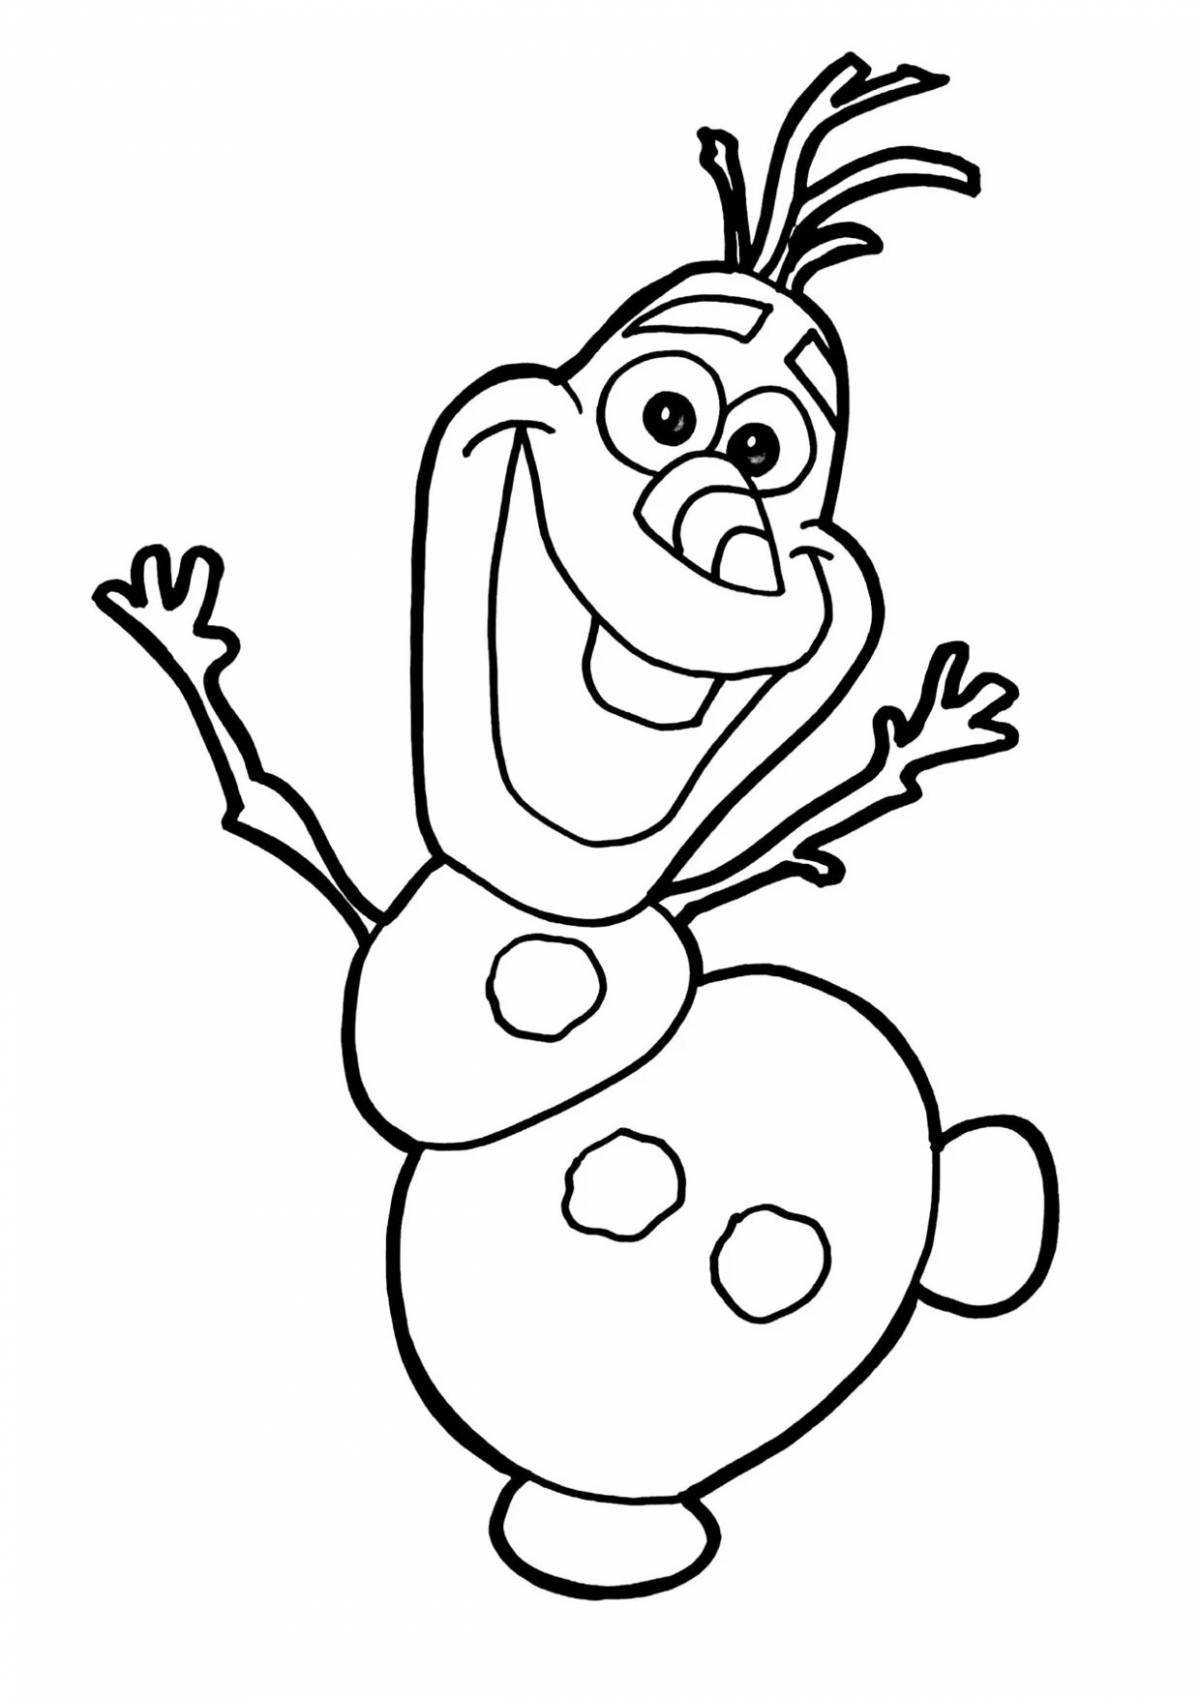 Great olaf coloring book for kids